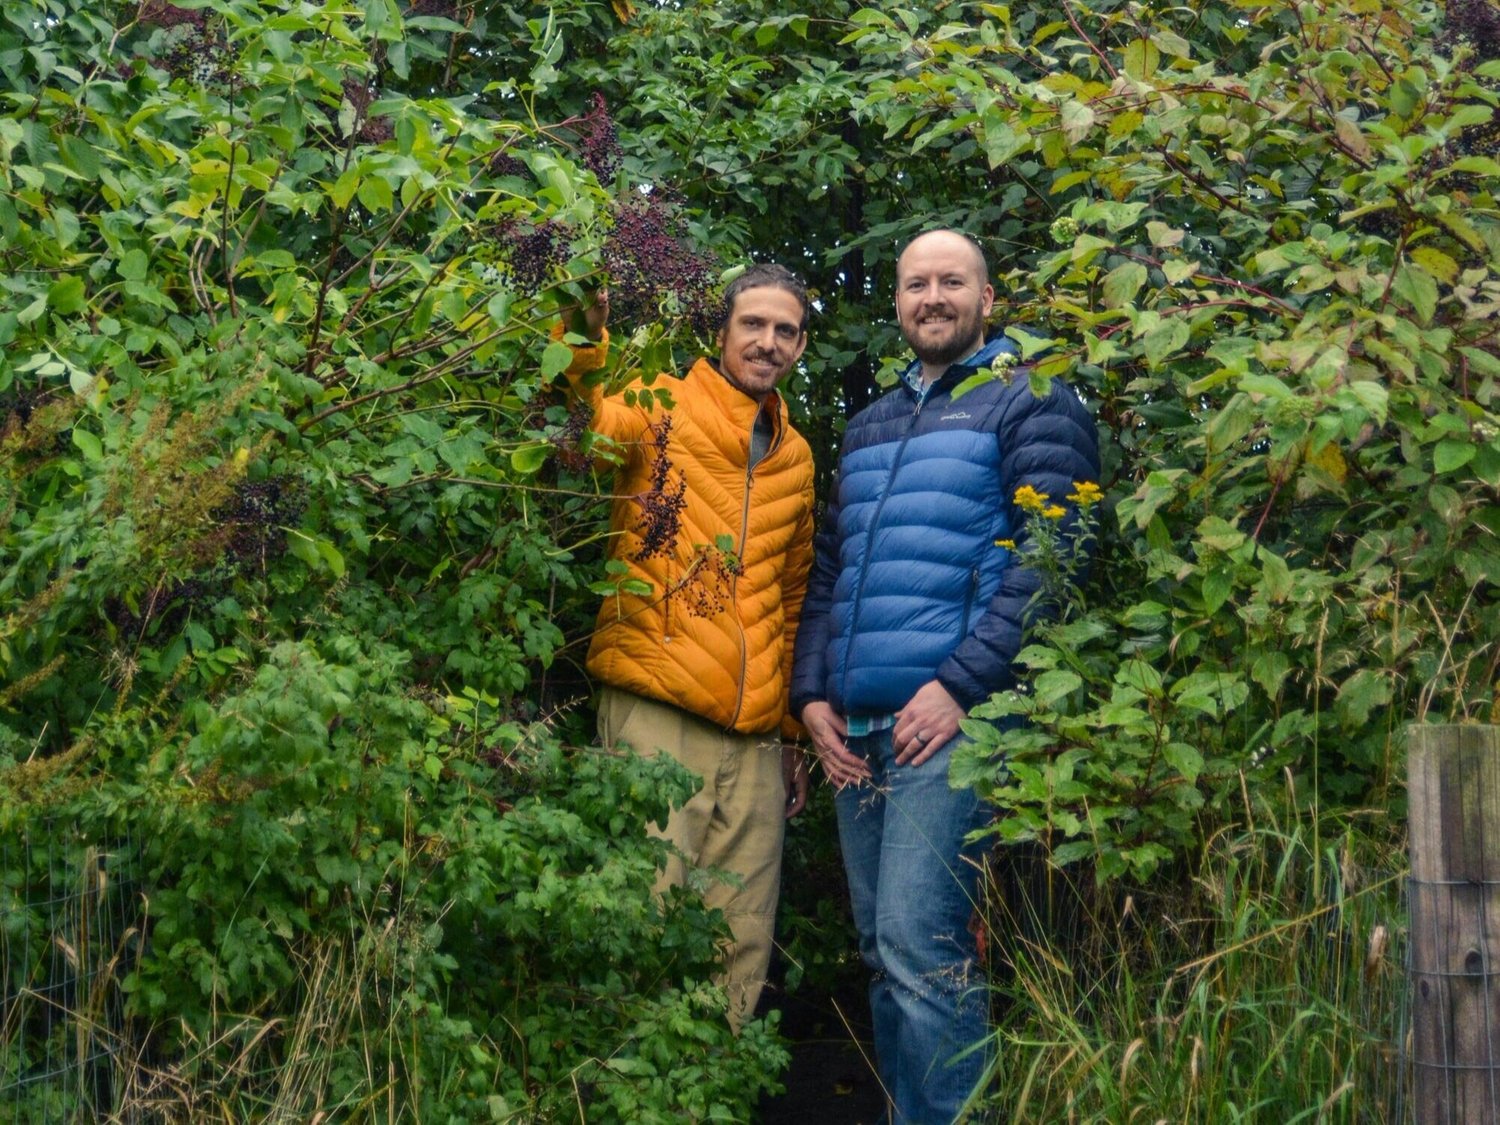 It was while working with Shubhendu Sharma (Afforestt), that Bryson learned the Miyawaki method of forest planting. Bryson believes the best part about these native forests is the visible increase in wildlife activity from animals, bees, and butterflies, the seasonal flowers, and abundant natural food production.